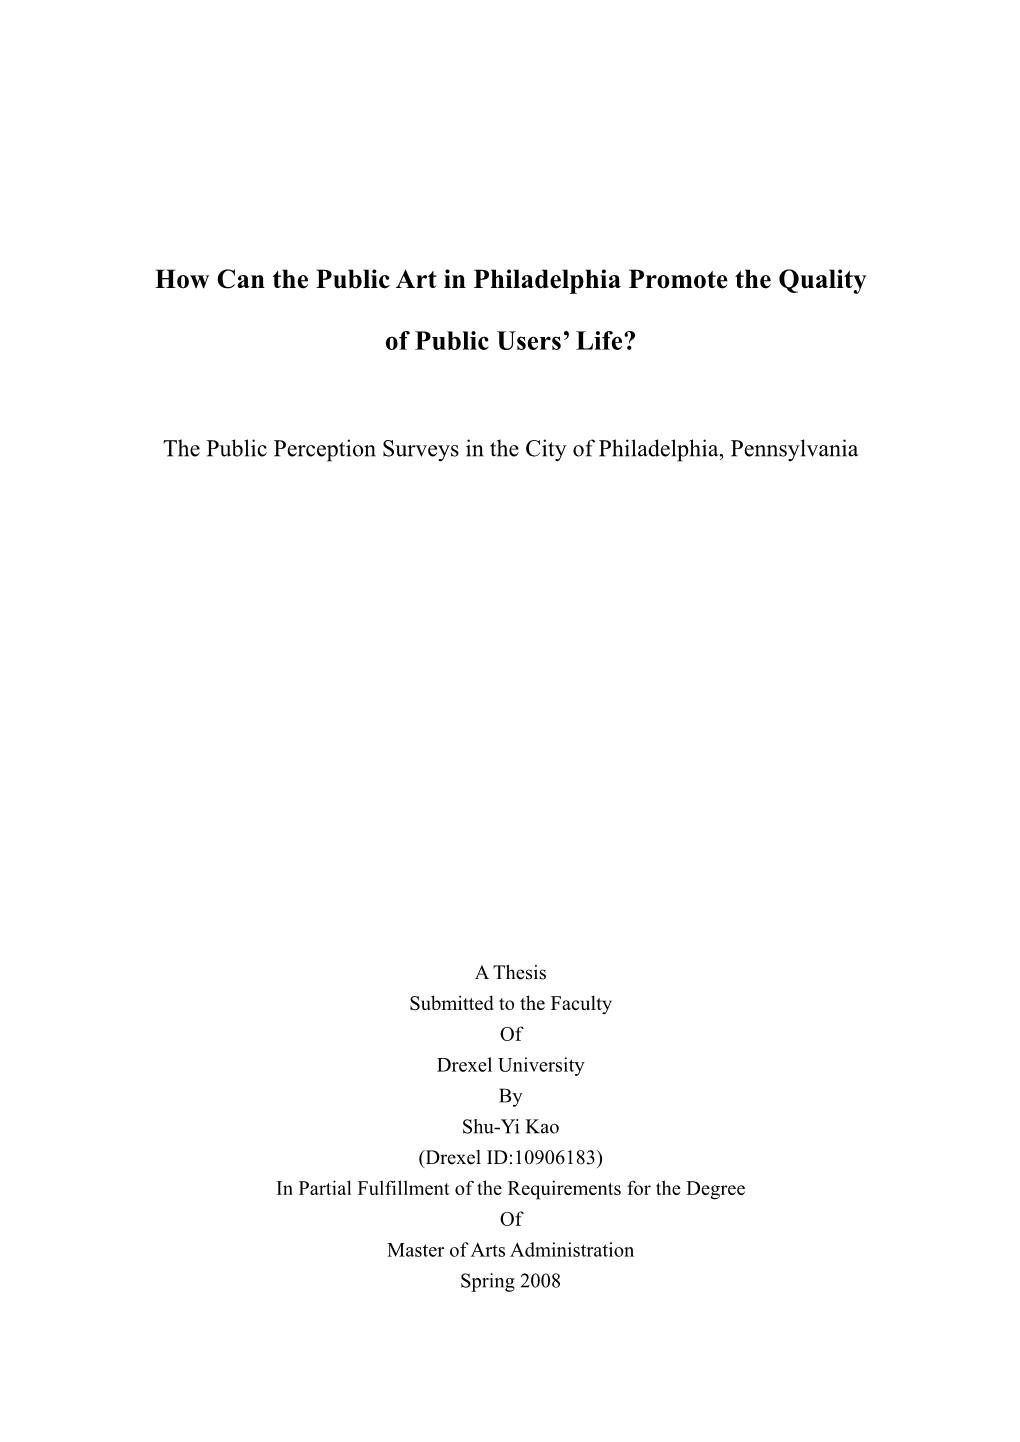 How Can the Public Art in Philadelphia Promote the Quality Of